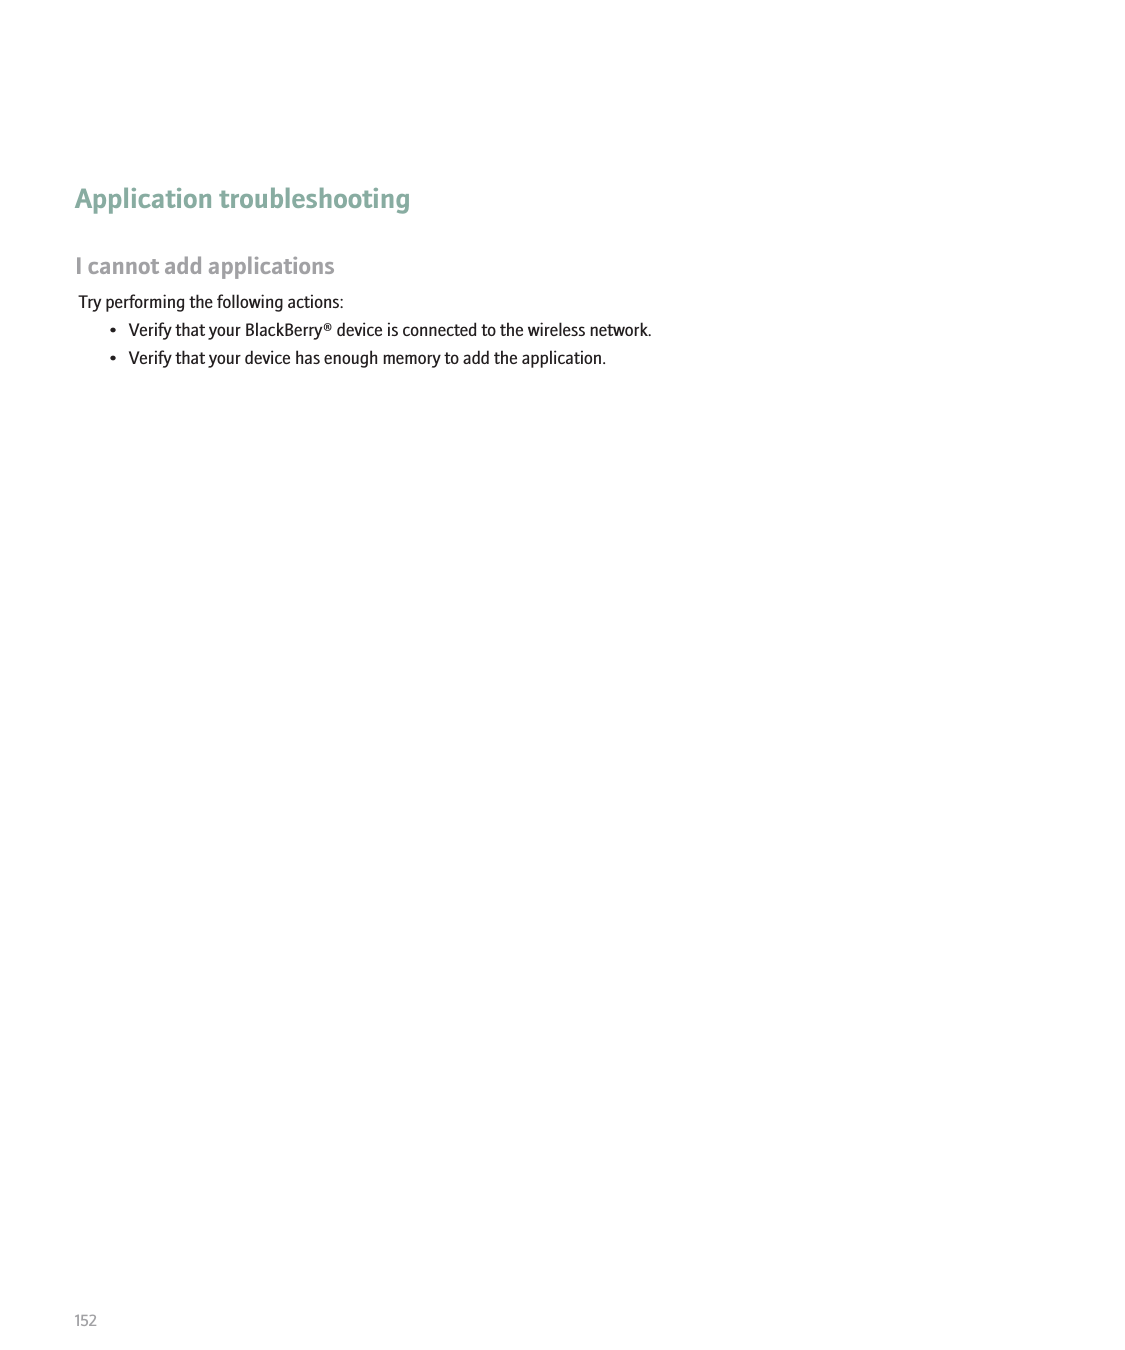 Application troubleshootingI cannot add applicationsTry performing the following actions:• Verify that your BlackBerry® device is connected to the wireless network.• Verify that your device has enough memory to add the application.152